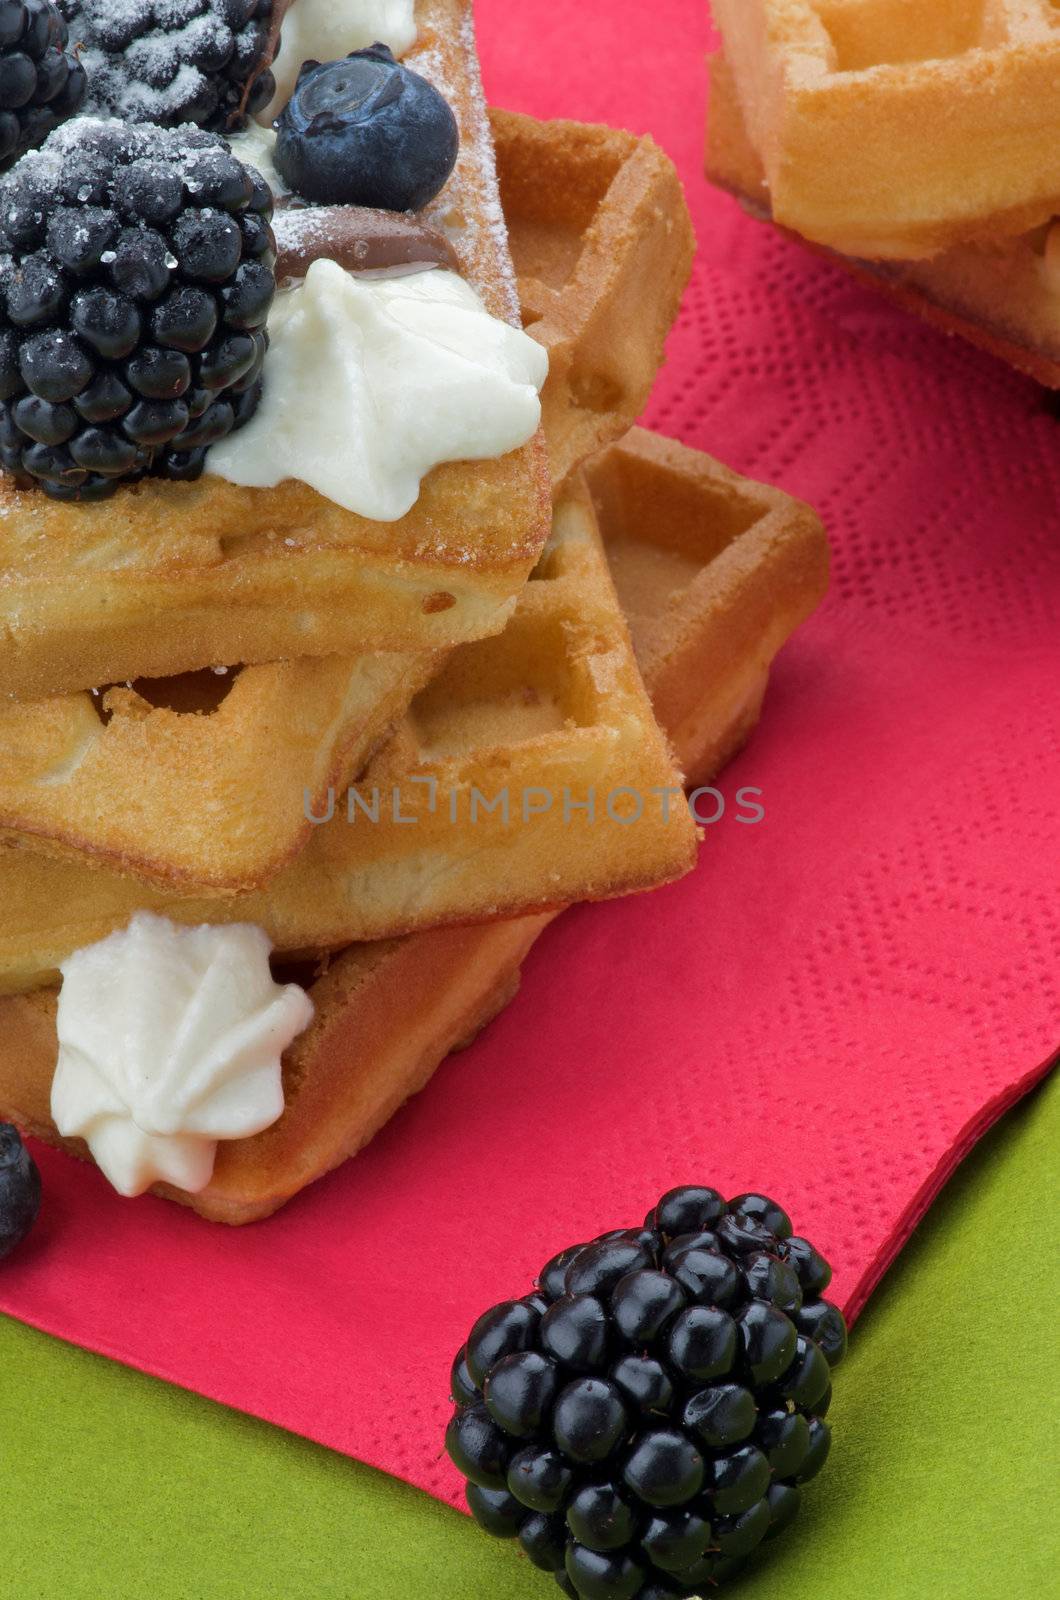 Arrangement of Delicious Belgian Waffle, Berries and Whipped Cream closeup on Red and Green Napkins